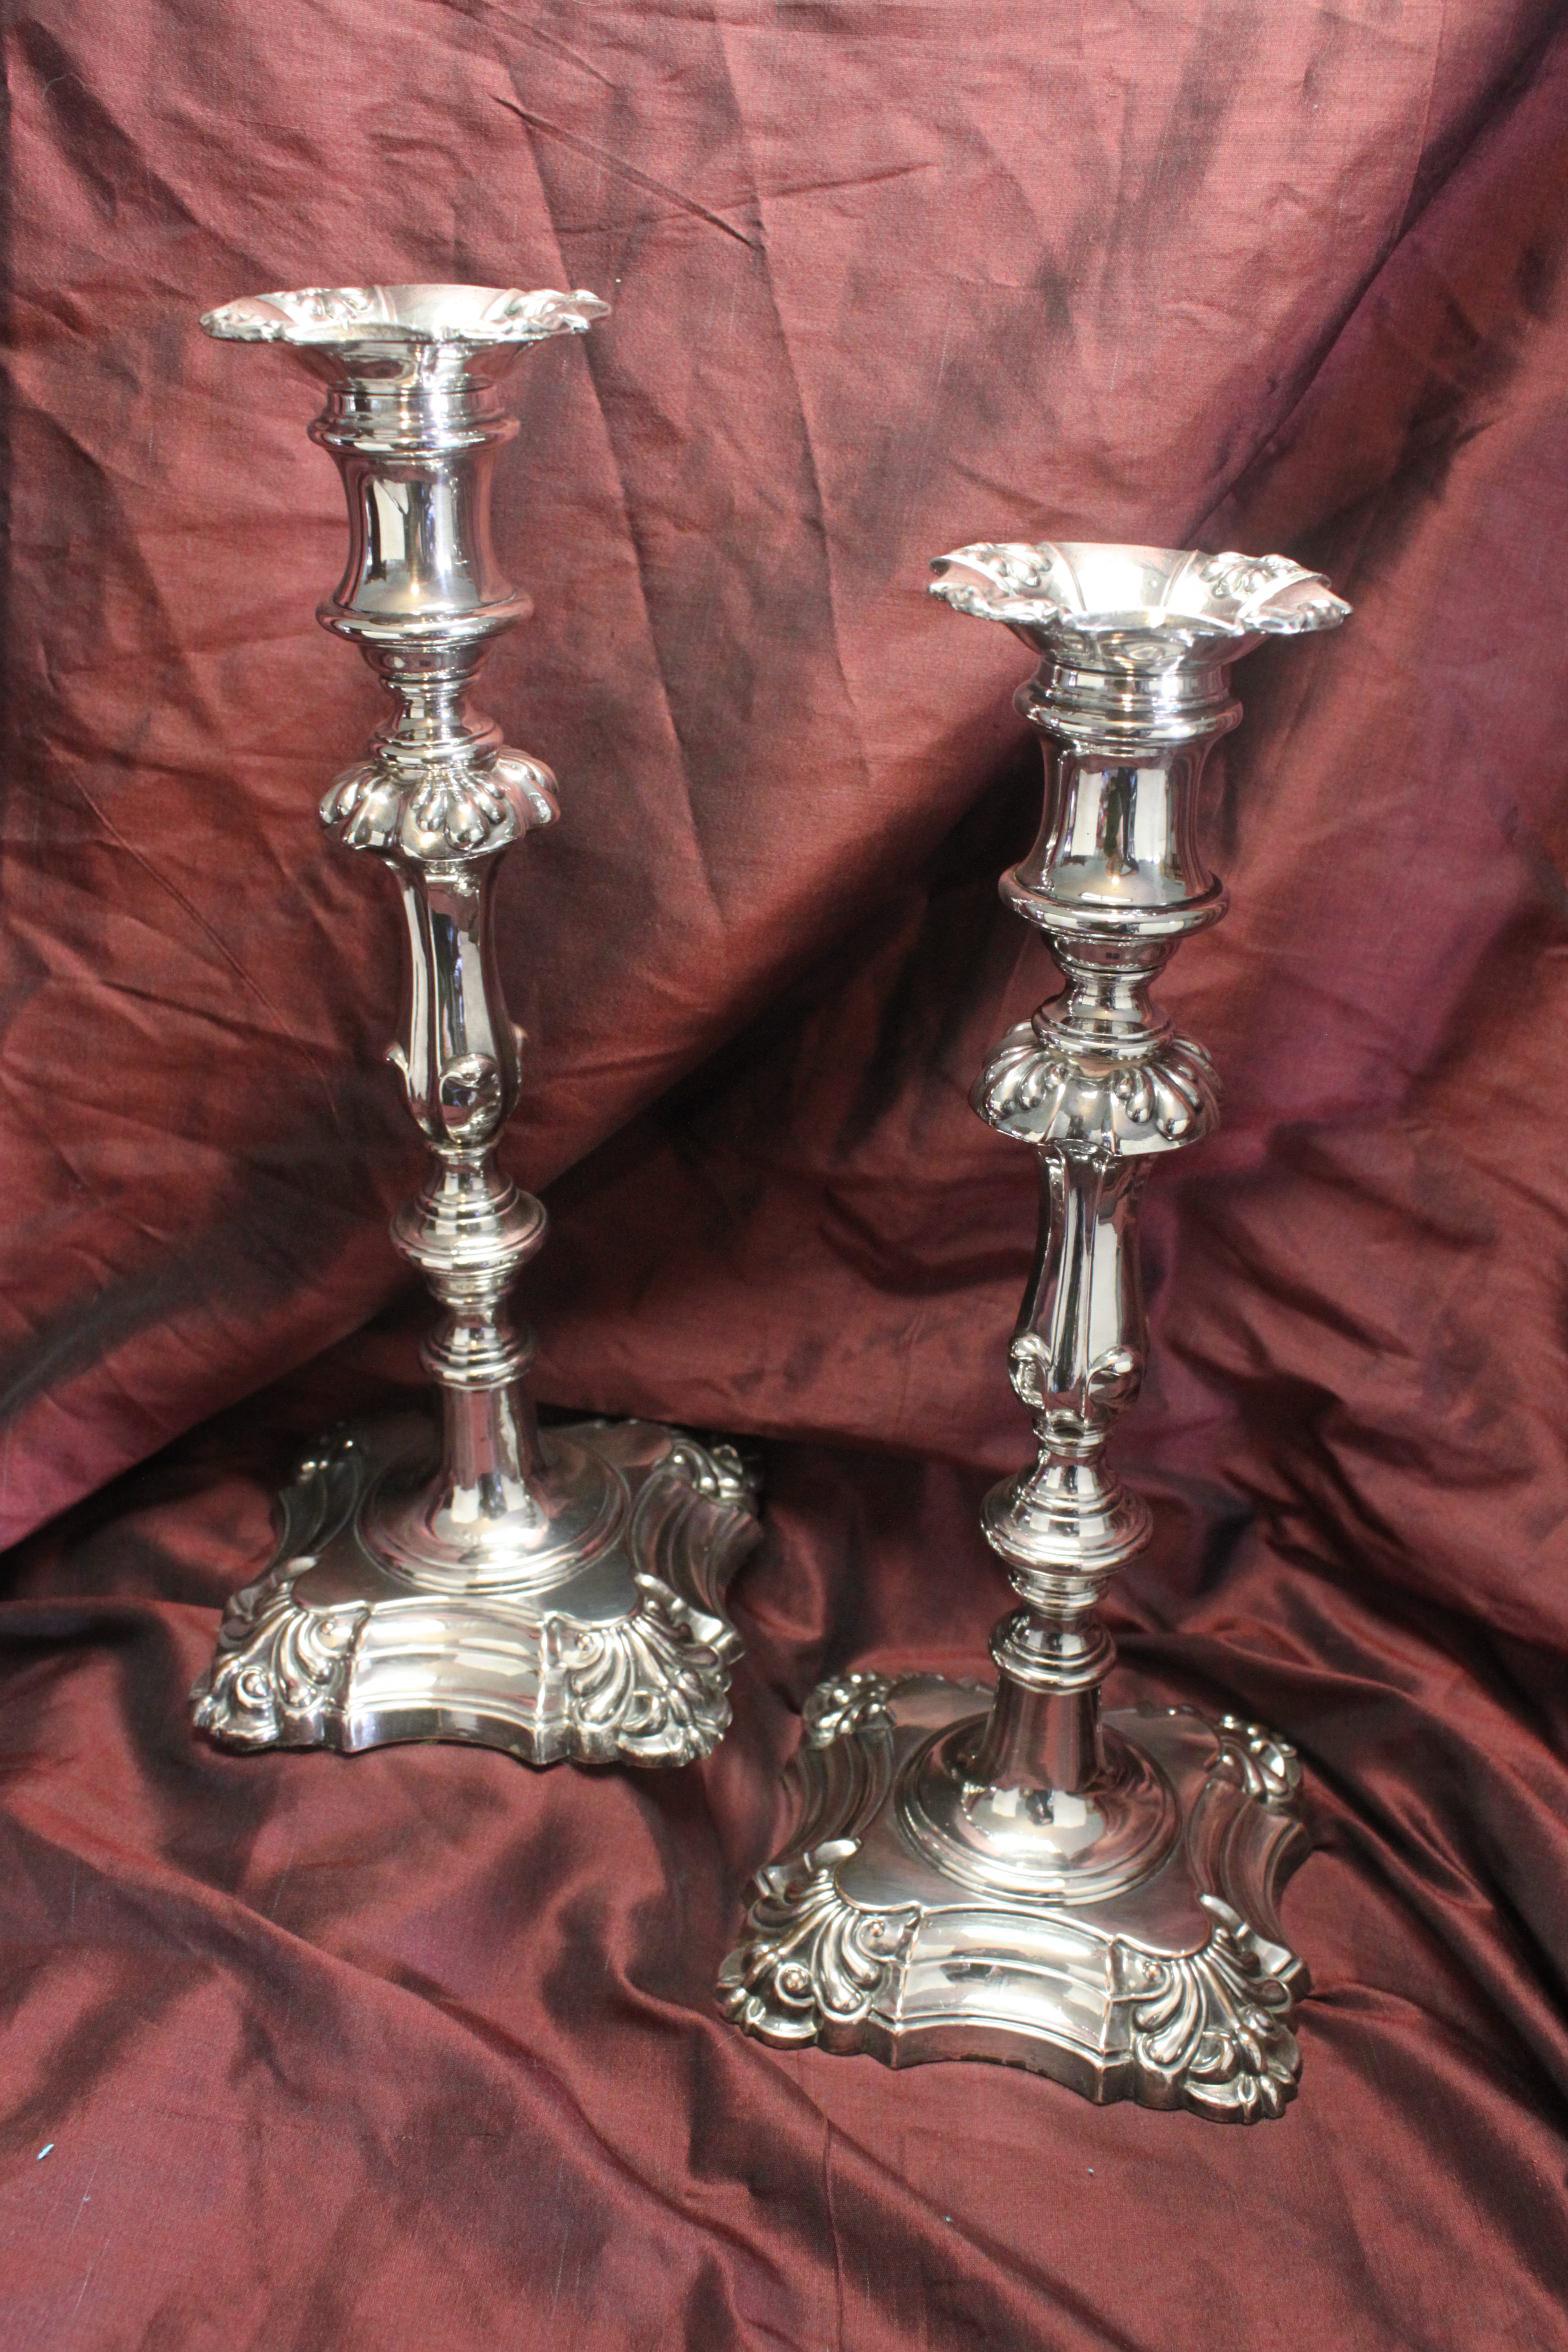 This very attractive pair of Old Sheffield plate candlesticks were made in Sheffield by the firm of Henry Wilkinson & Co. They stand 290 mm (11.5 inches) high, on a 124 mm (5 inch) base, and are in very good condition, with only minimal wear to the